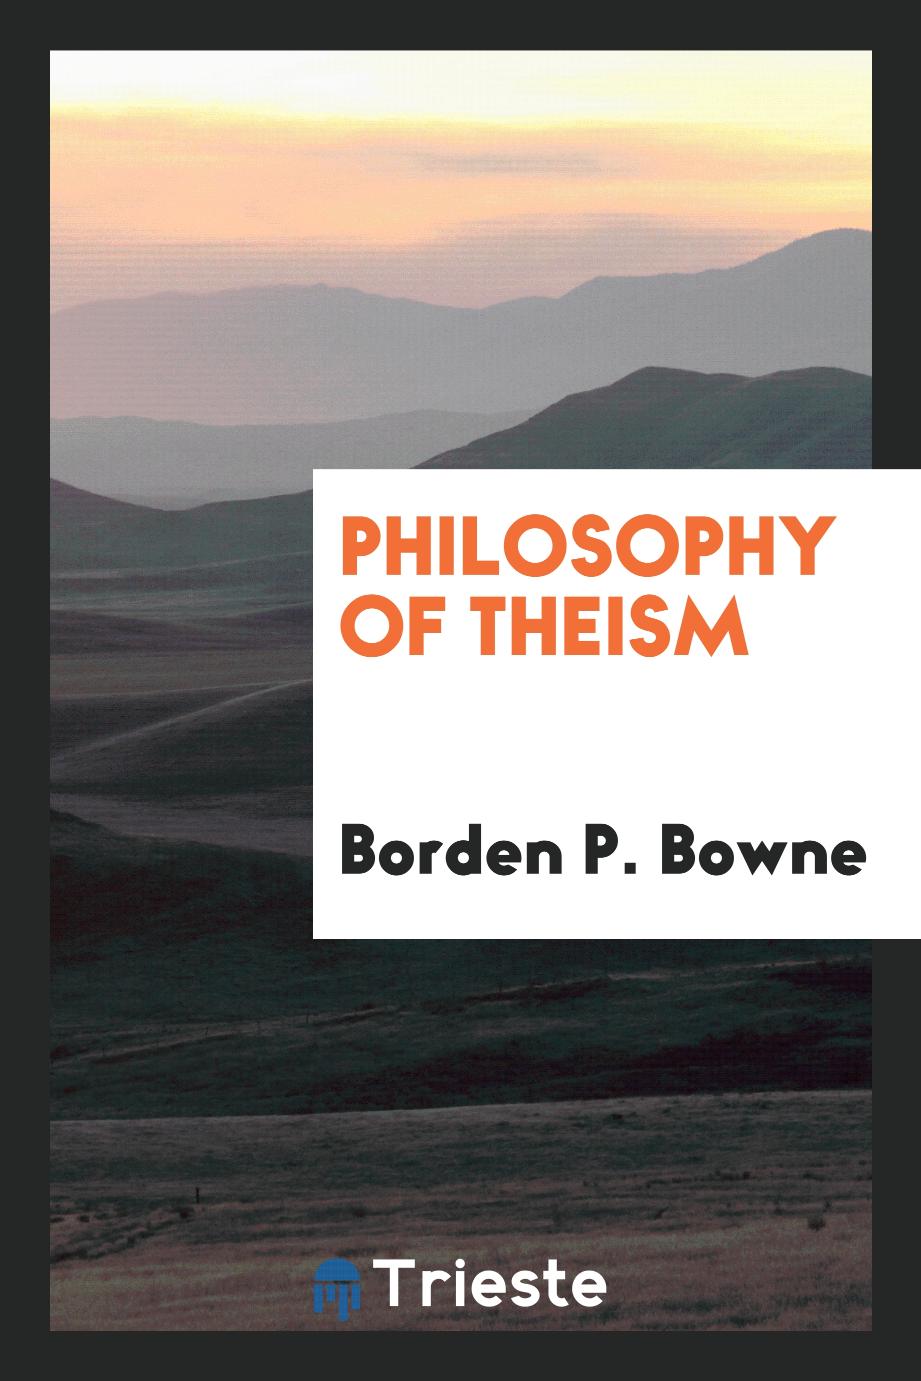 Philosophy of theism